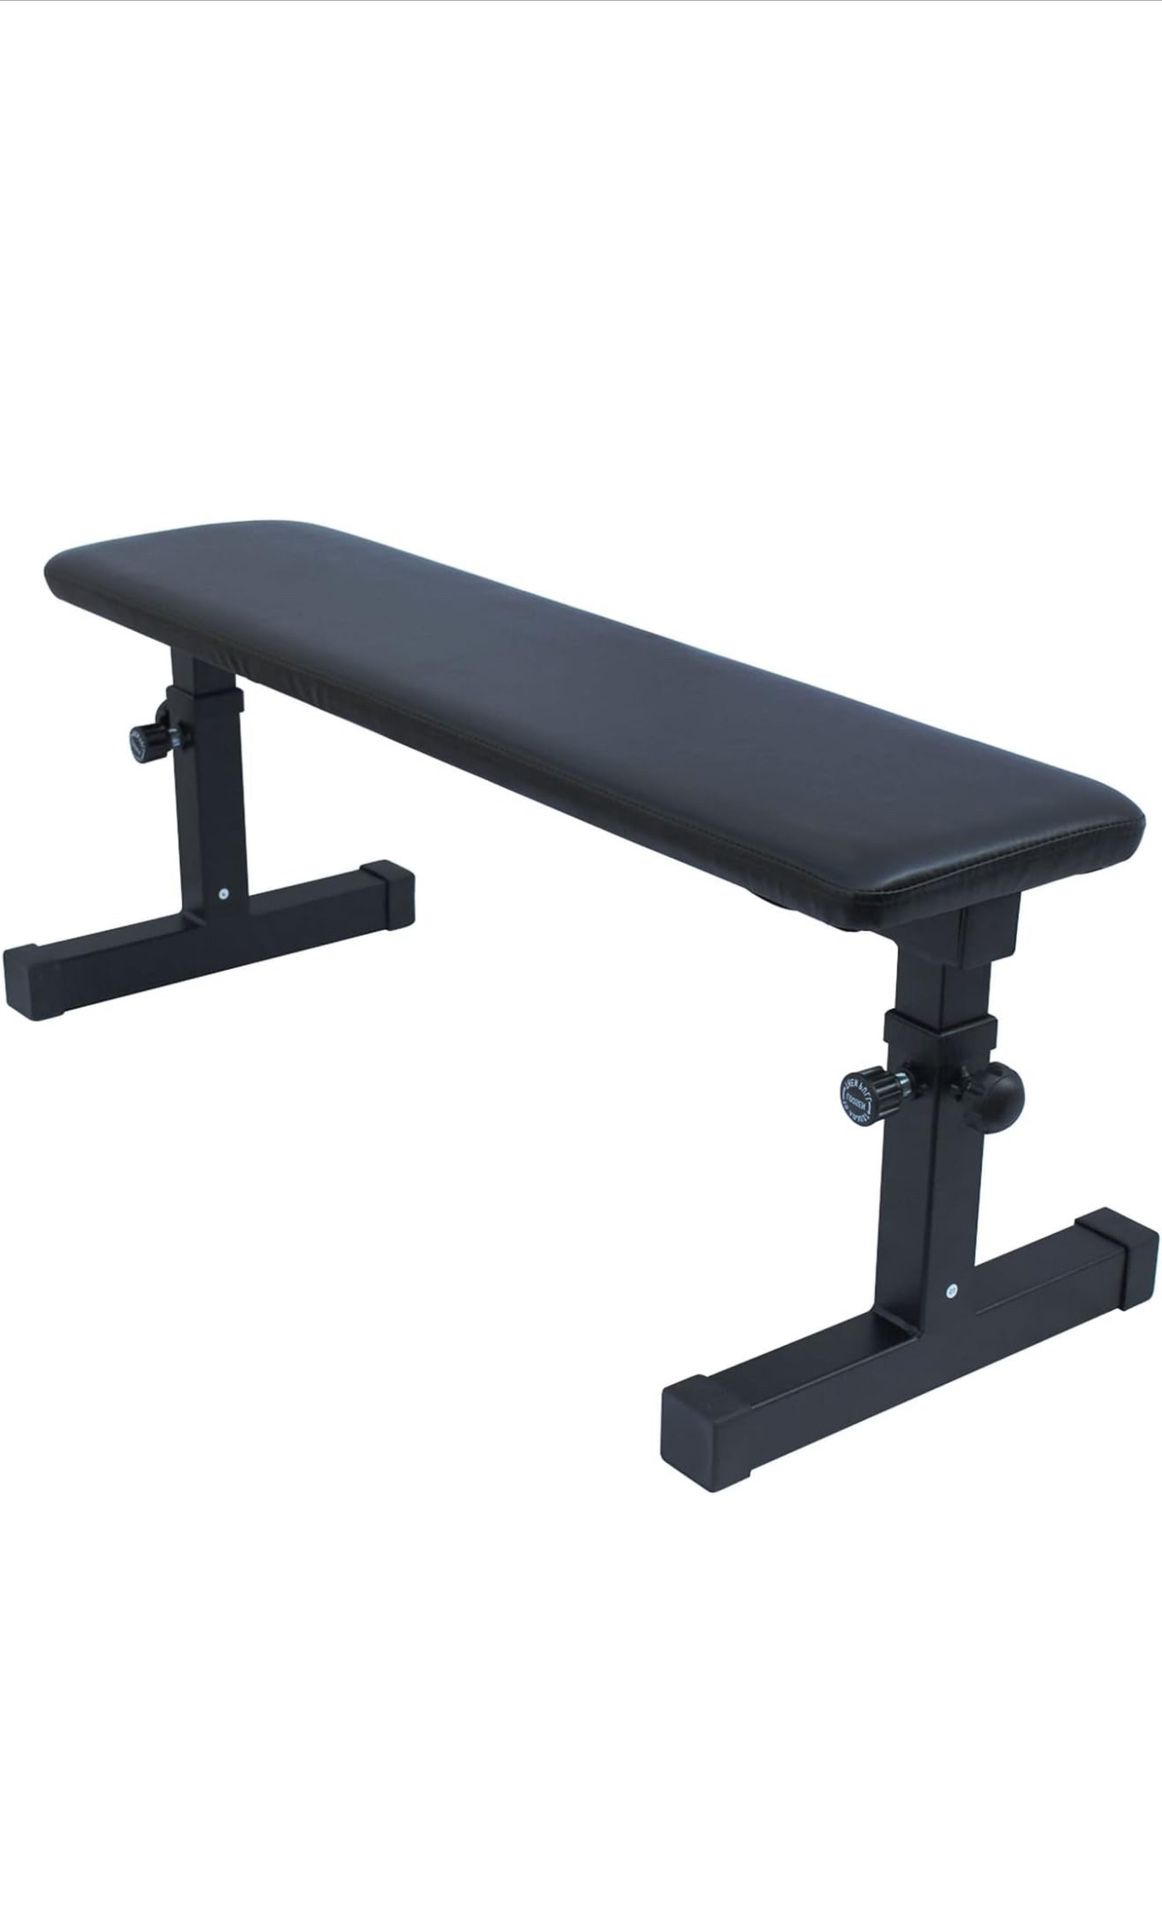 Flat Weight Bench Utility Workout Adjustable Height Bench for Strength Training Exercise & Fitness